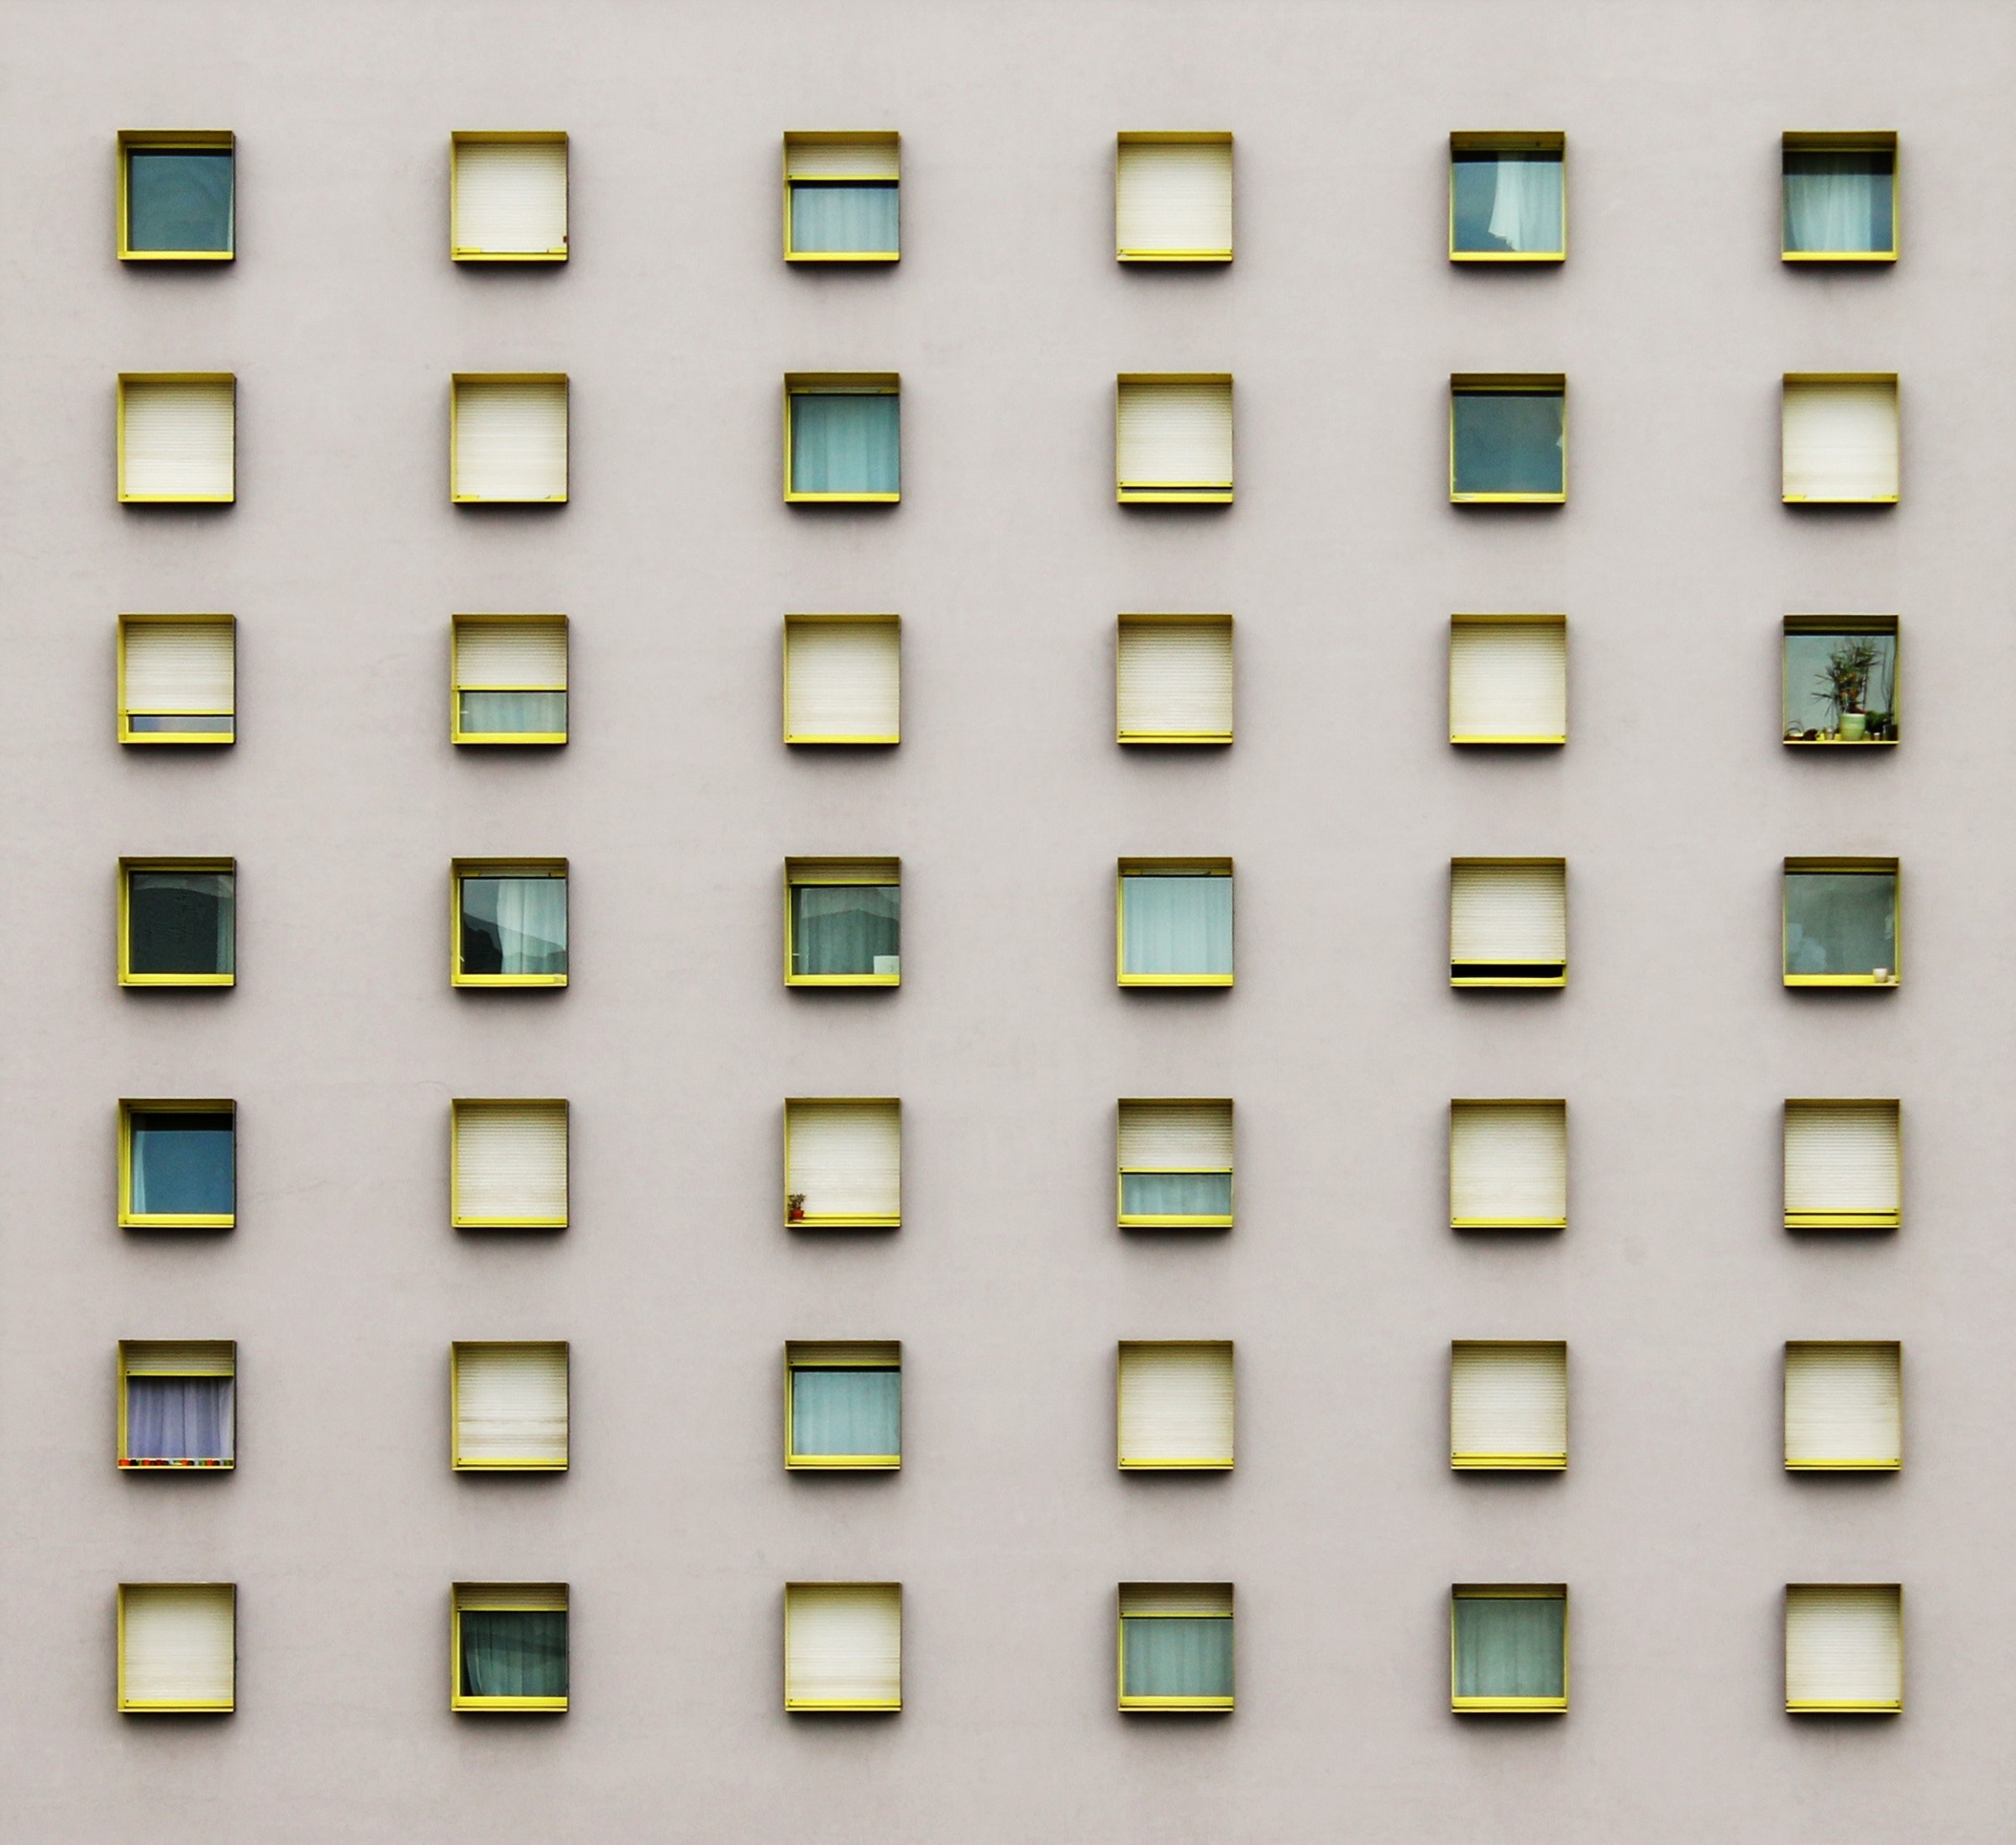 Rows of windows on building facade. Image from Pexels Pixabay. 